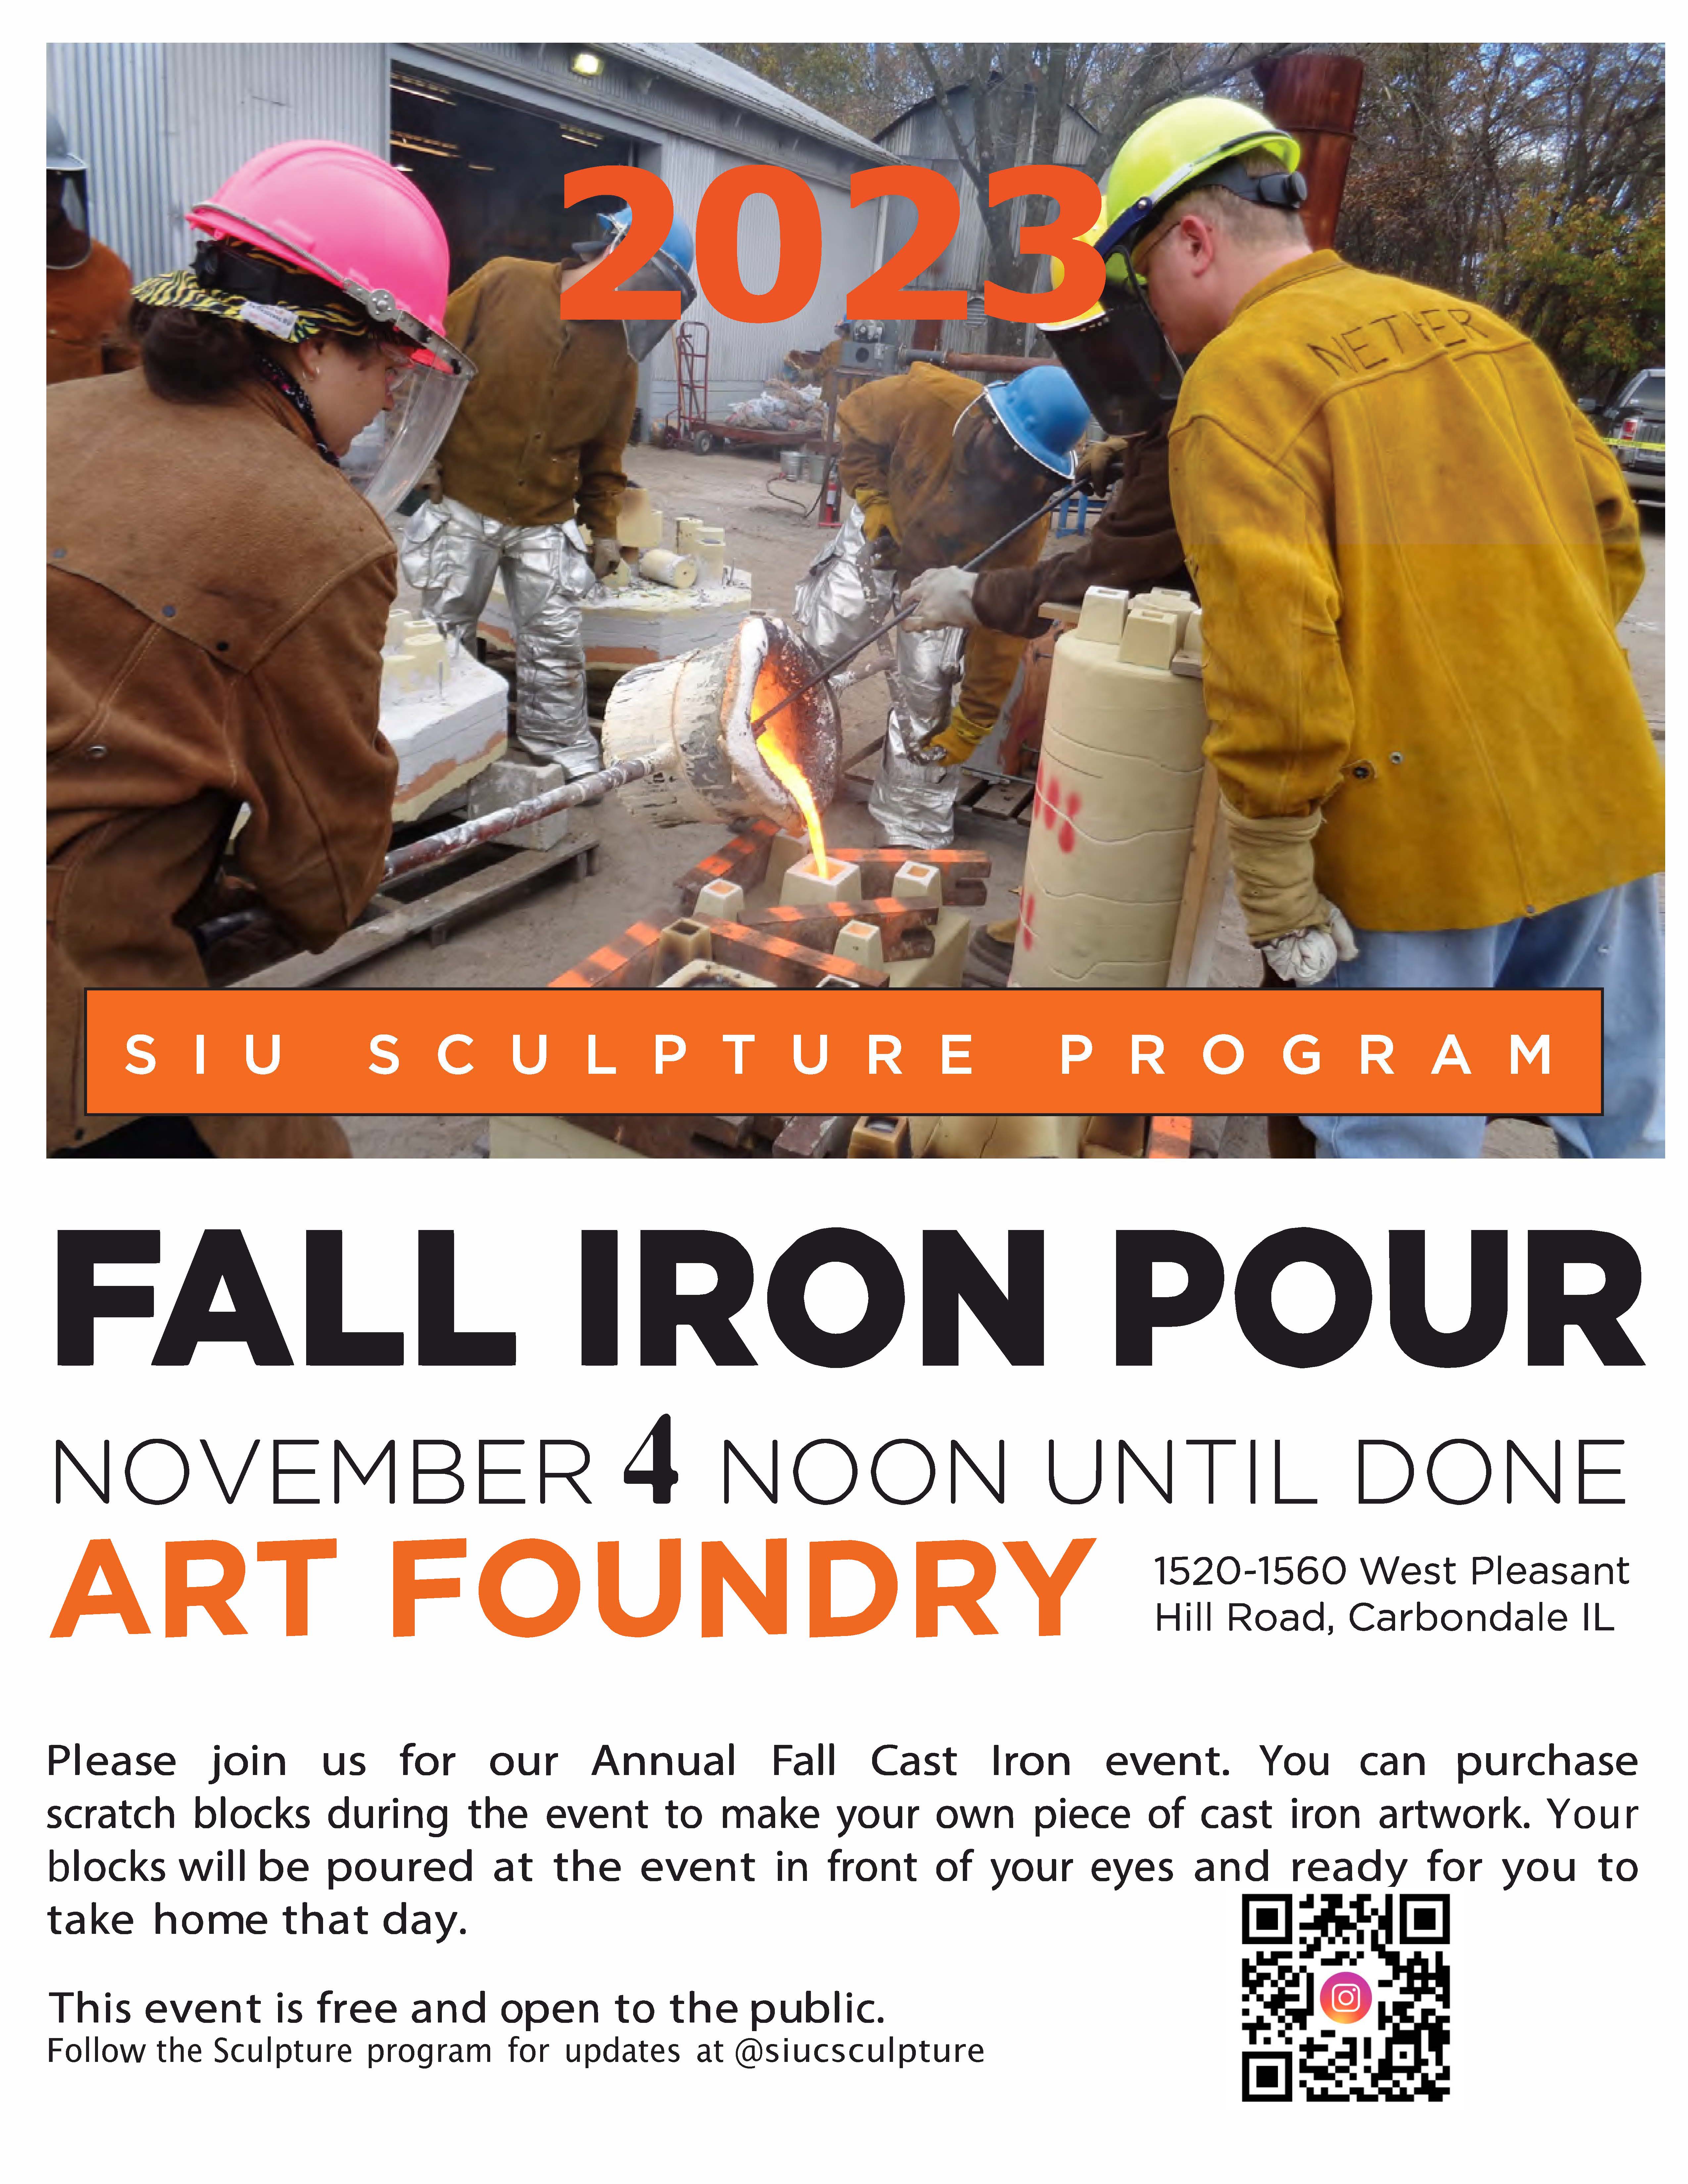 Fall Iron Pour Poster: You can purchase scratch blocks during the event to make your own piece of cast iron artwork. Your blocks will be poured at the event in front of your eyes and ready for you to take home that day. This event is free and open to the public!